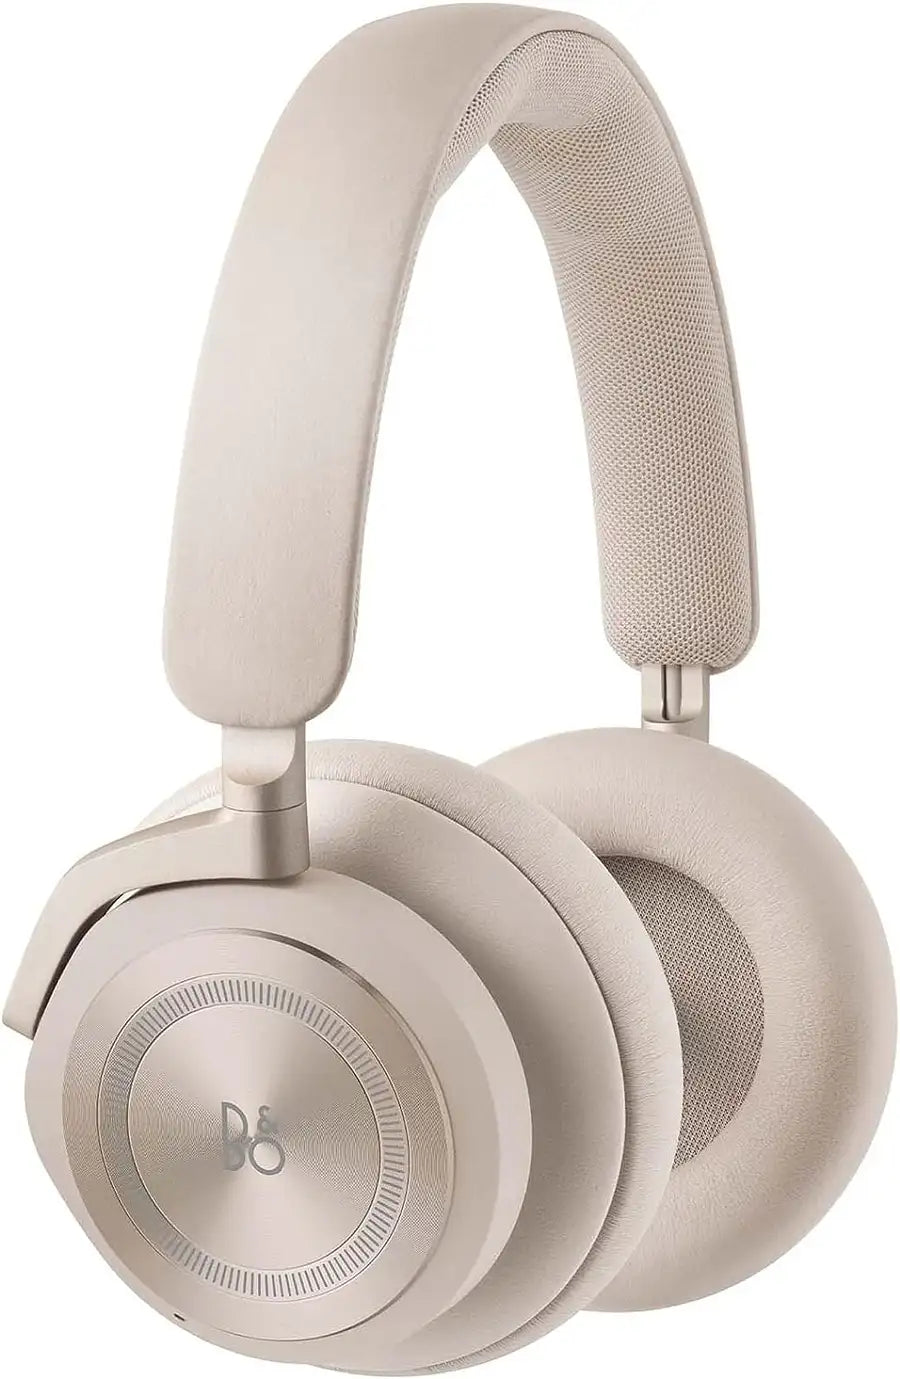 Bang & Olufsen Beoplay HX – Comfy Wireless ANC Over-Ear Headphones>Shop the best>Wireless Headphones from>Bang & Olufsen> just-$378.99> Shop now and save at>Future Tech Wear